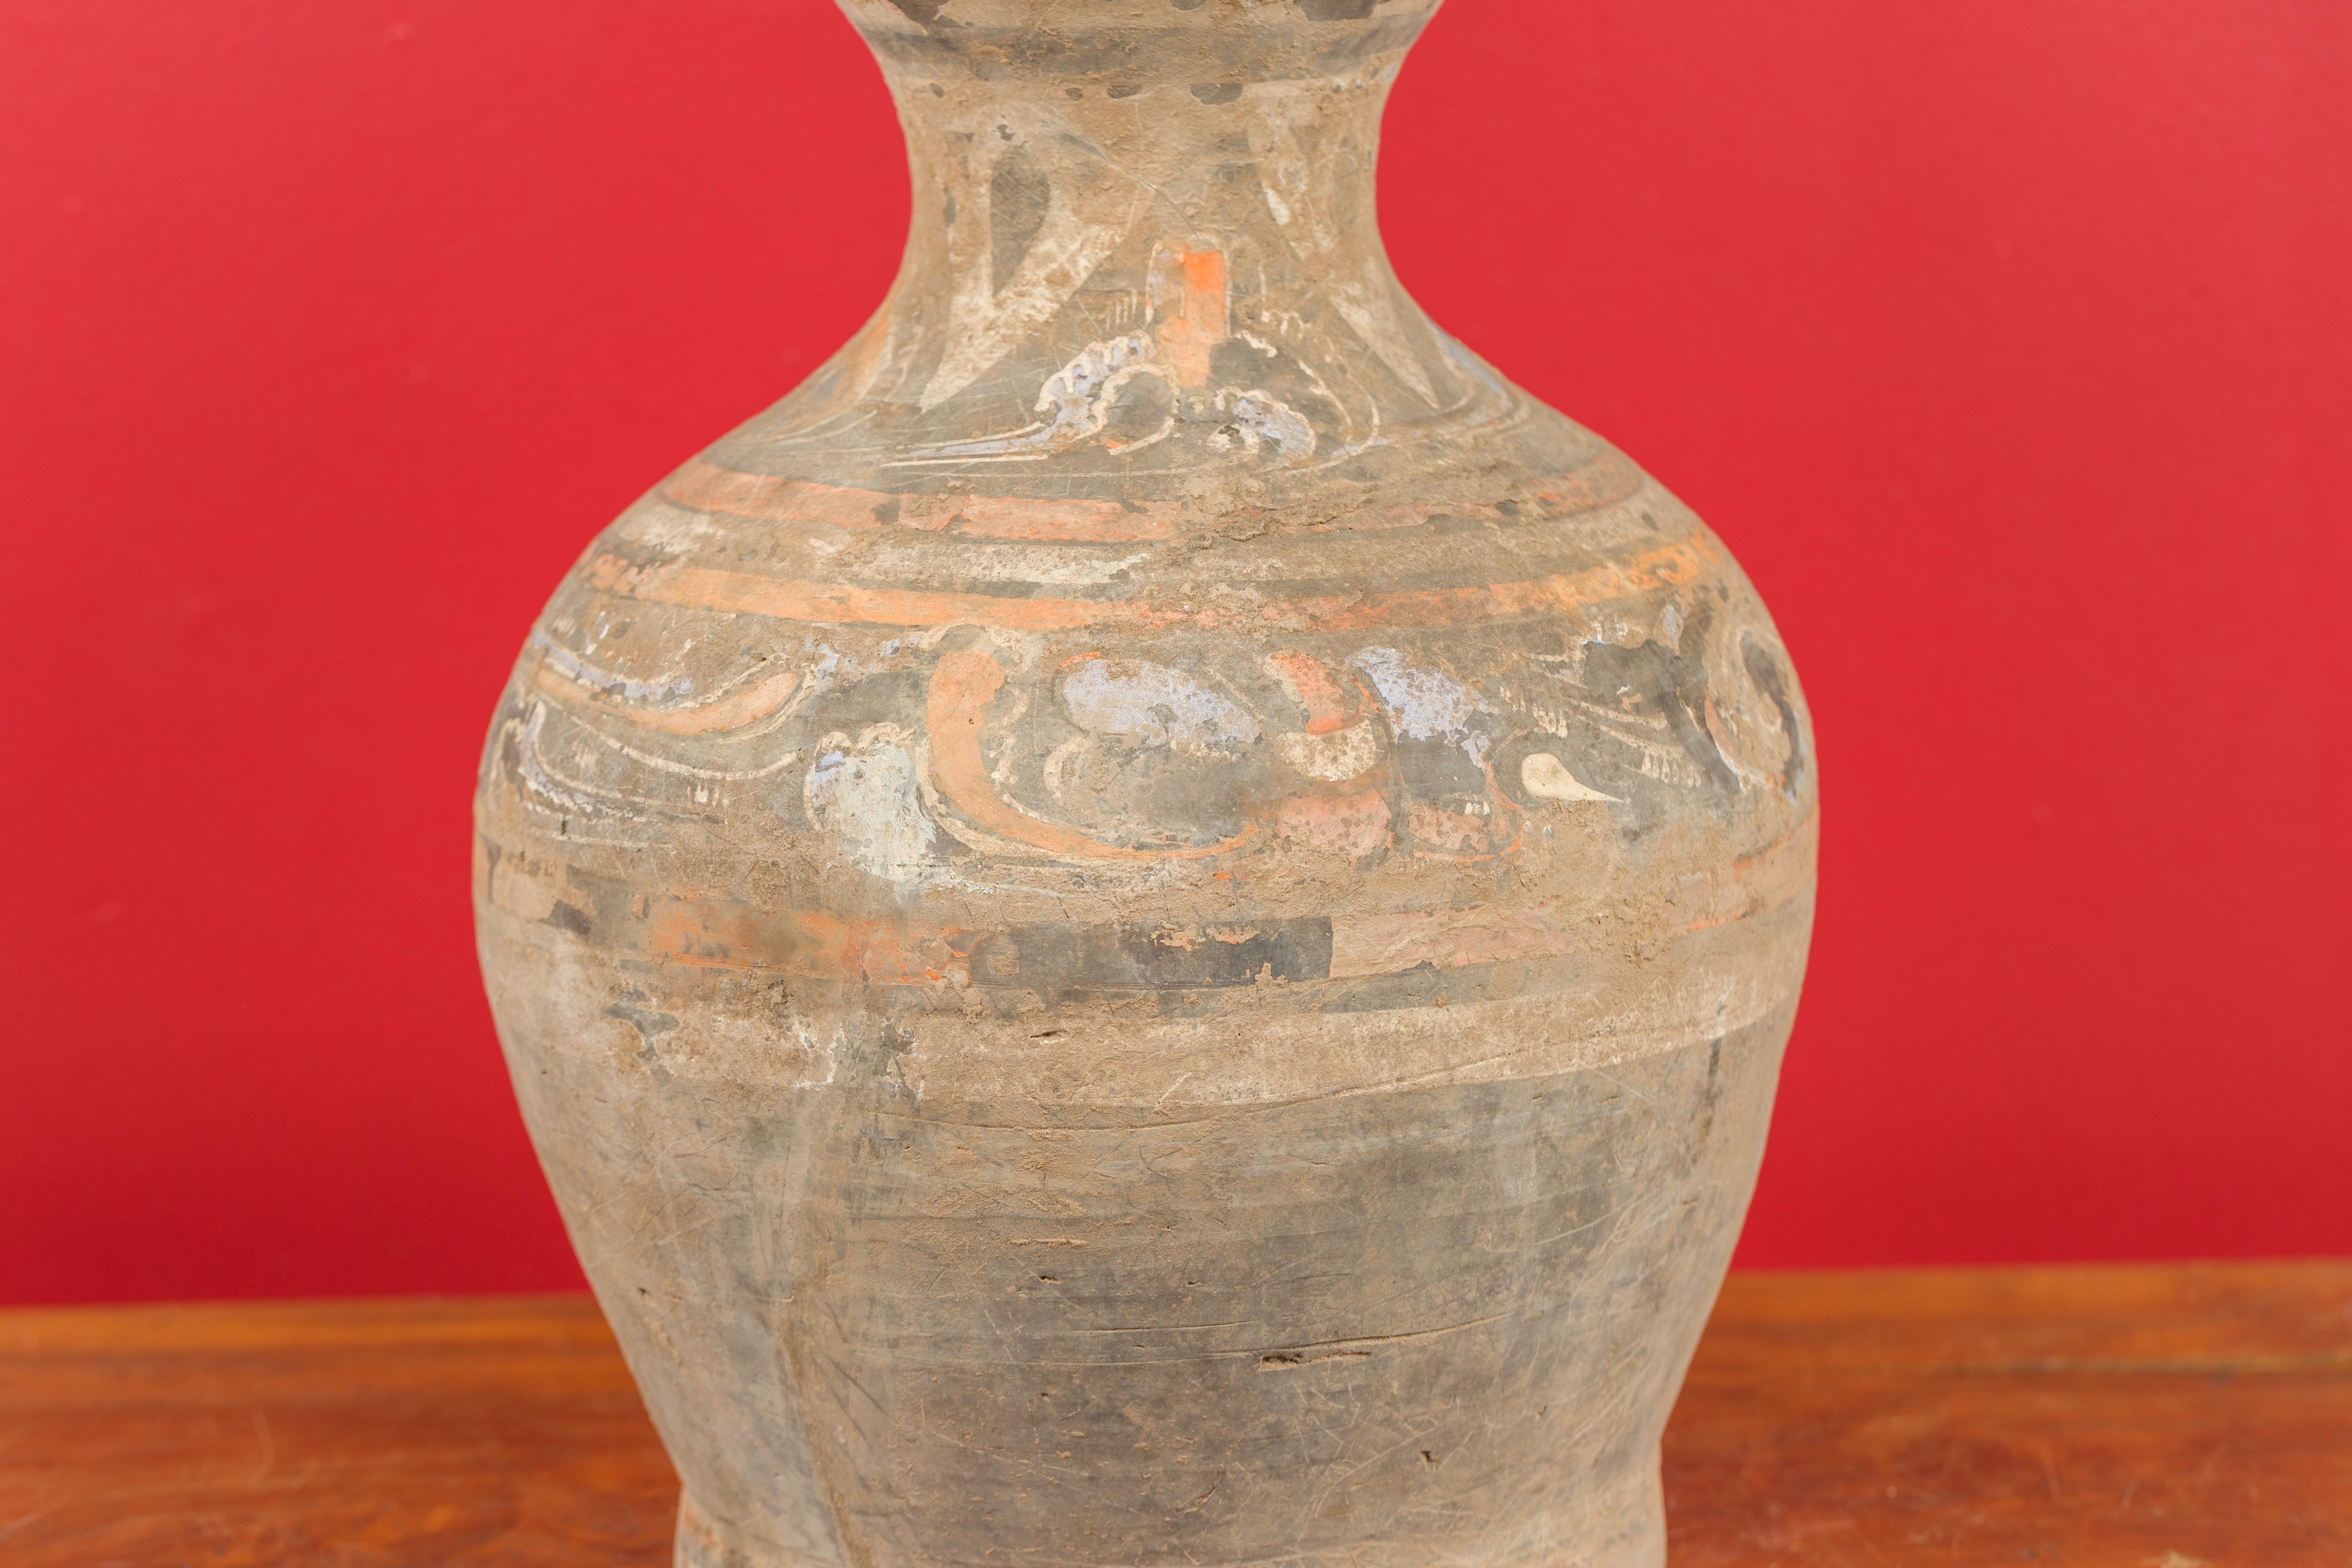 Chinese Han Dynasty Terracotta Hu Vessel with Original Paint circa 202 BC-200 AD 1